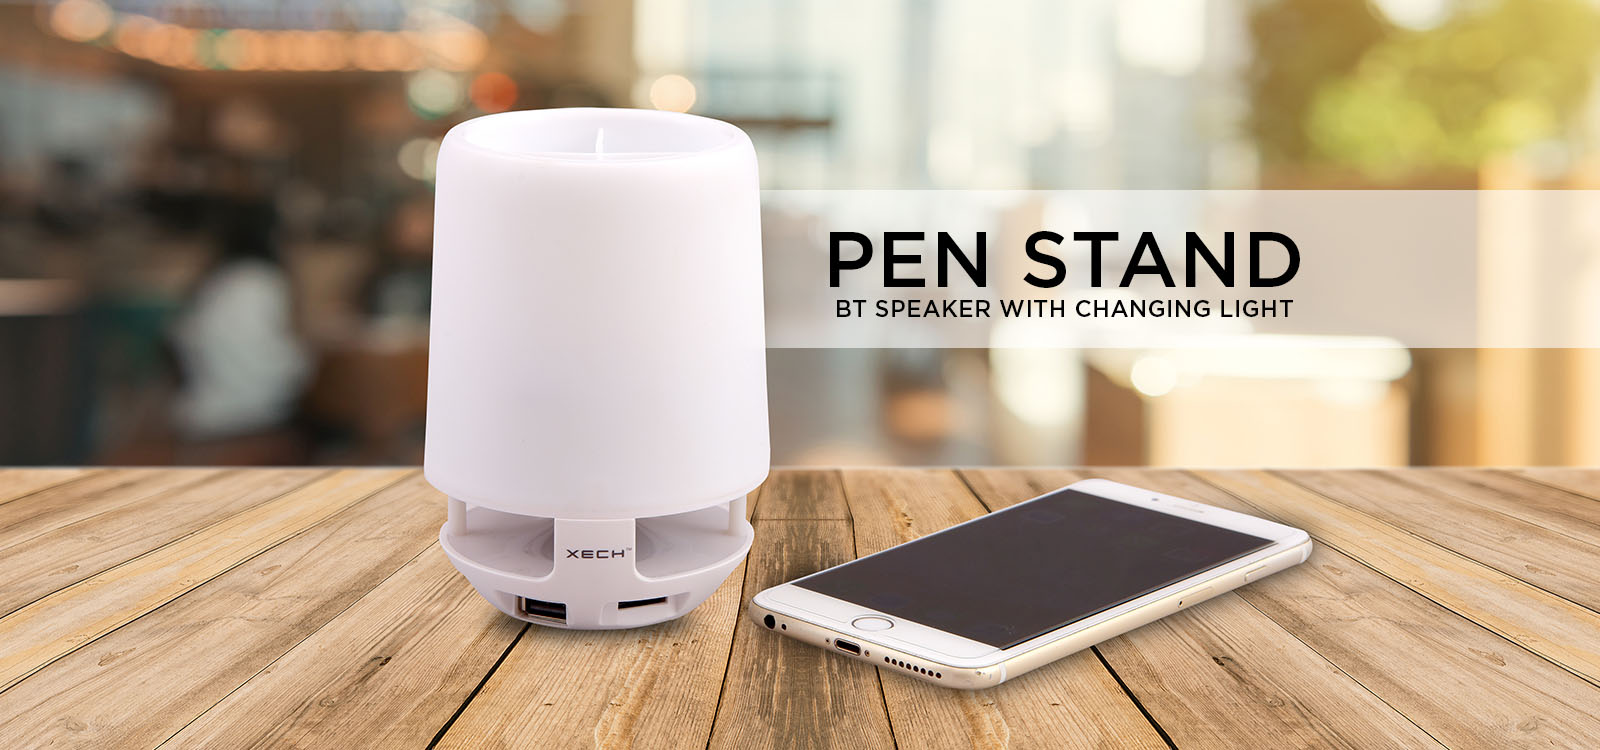 Pen stand BT speaker with changing light